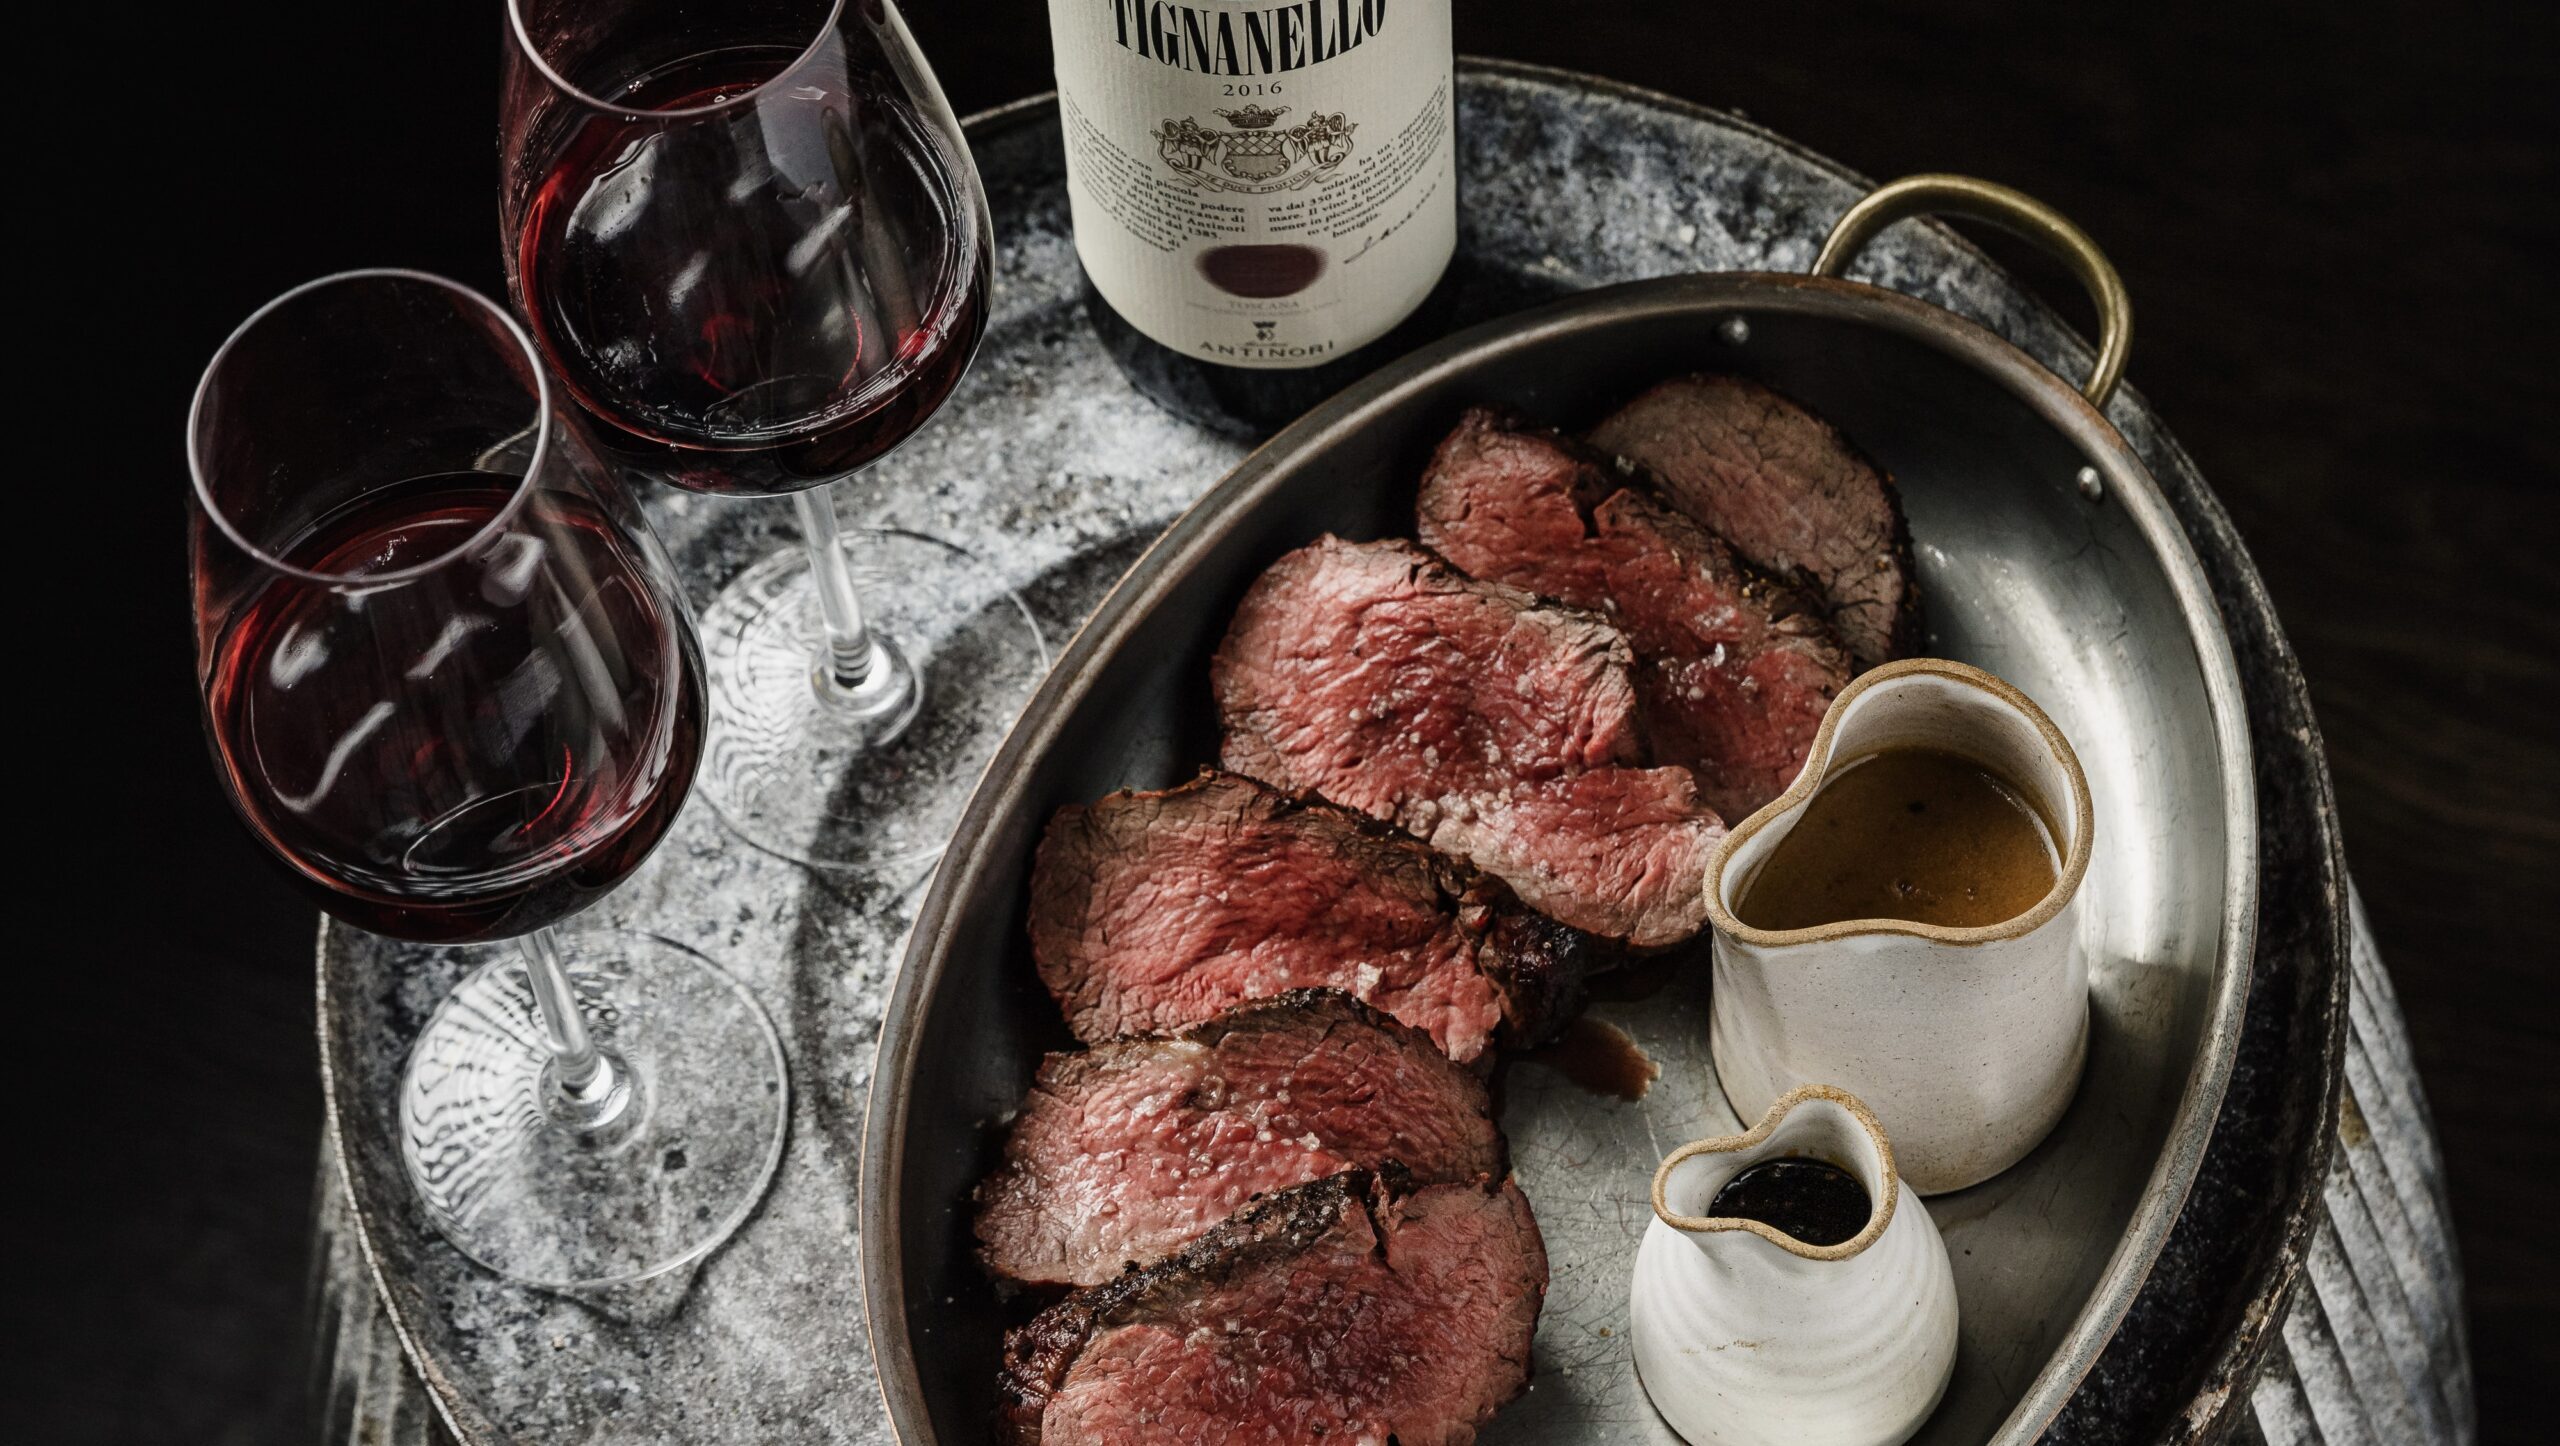 A perfectly cooked steak and a bottle red wine served at pasture.